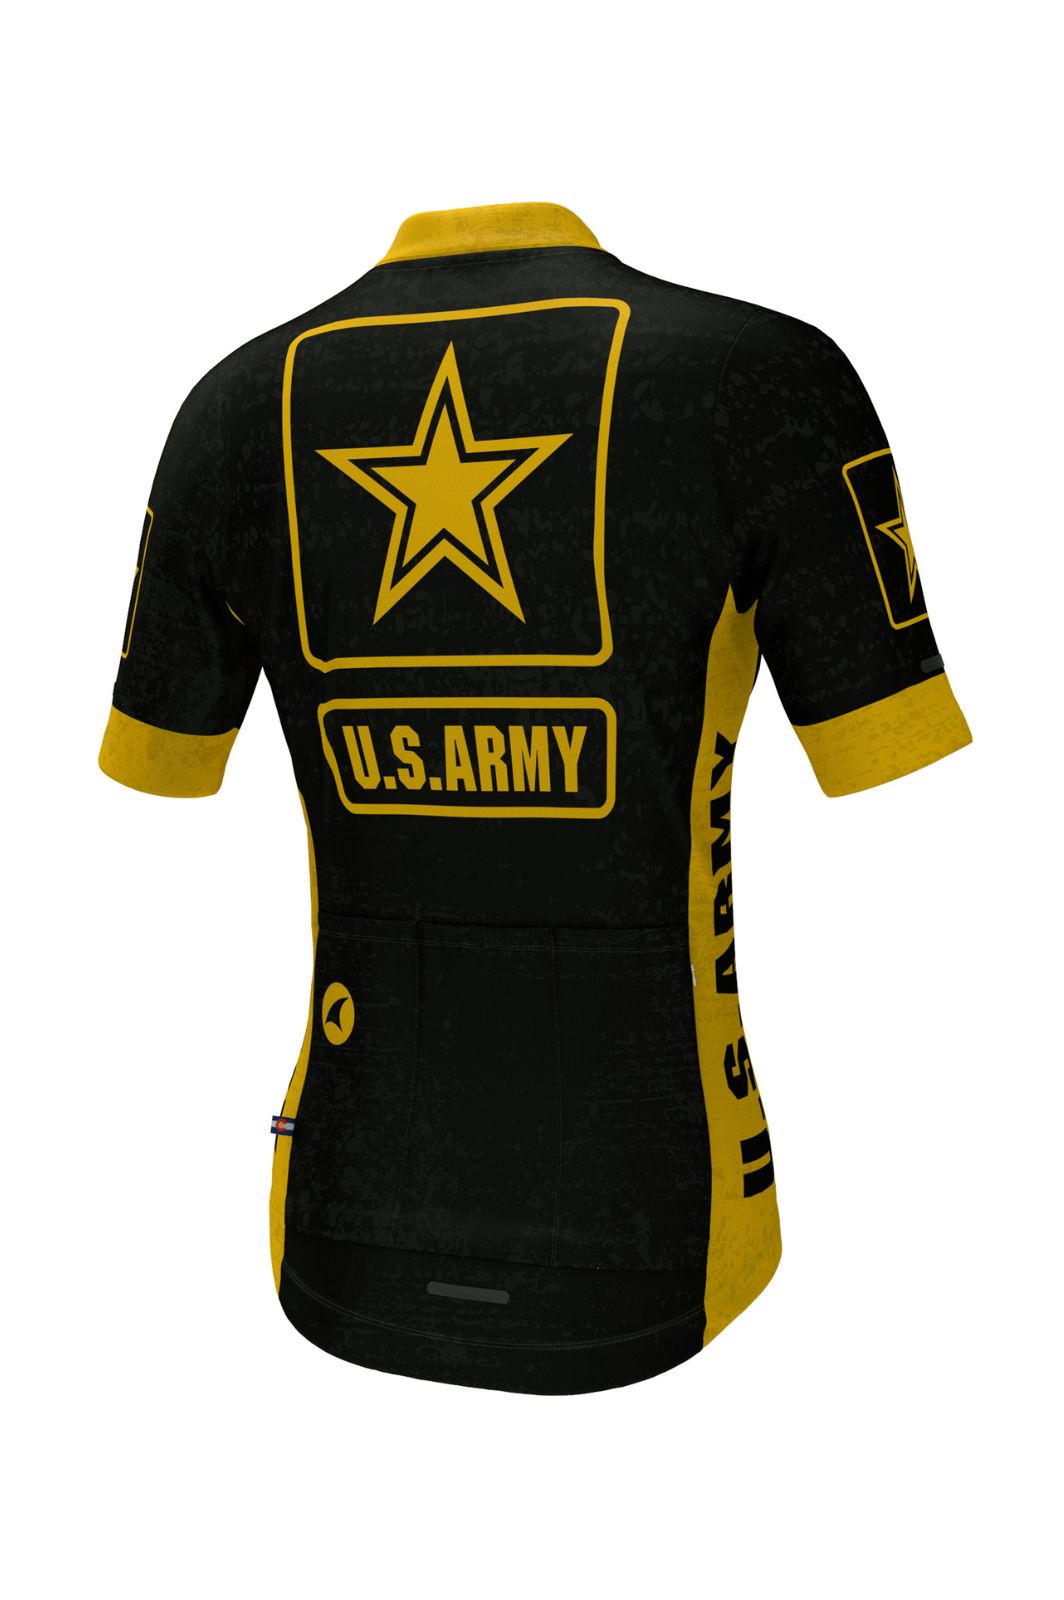 Women's US Army Cycling Jersey - Ascent Back View